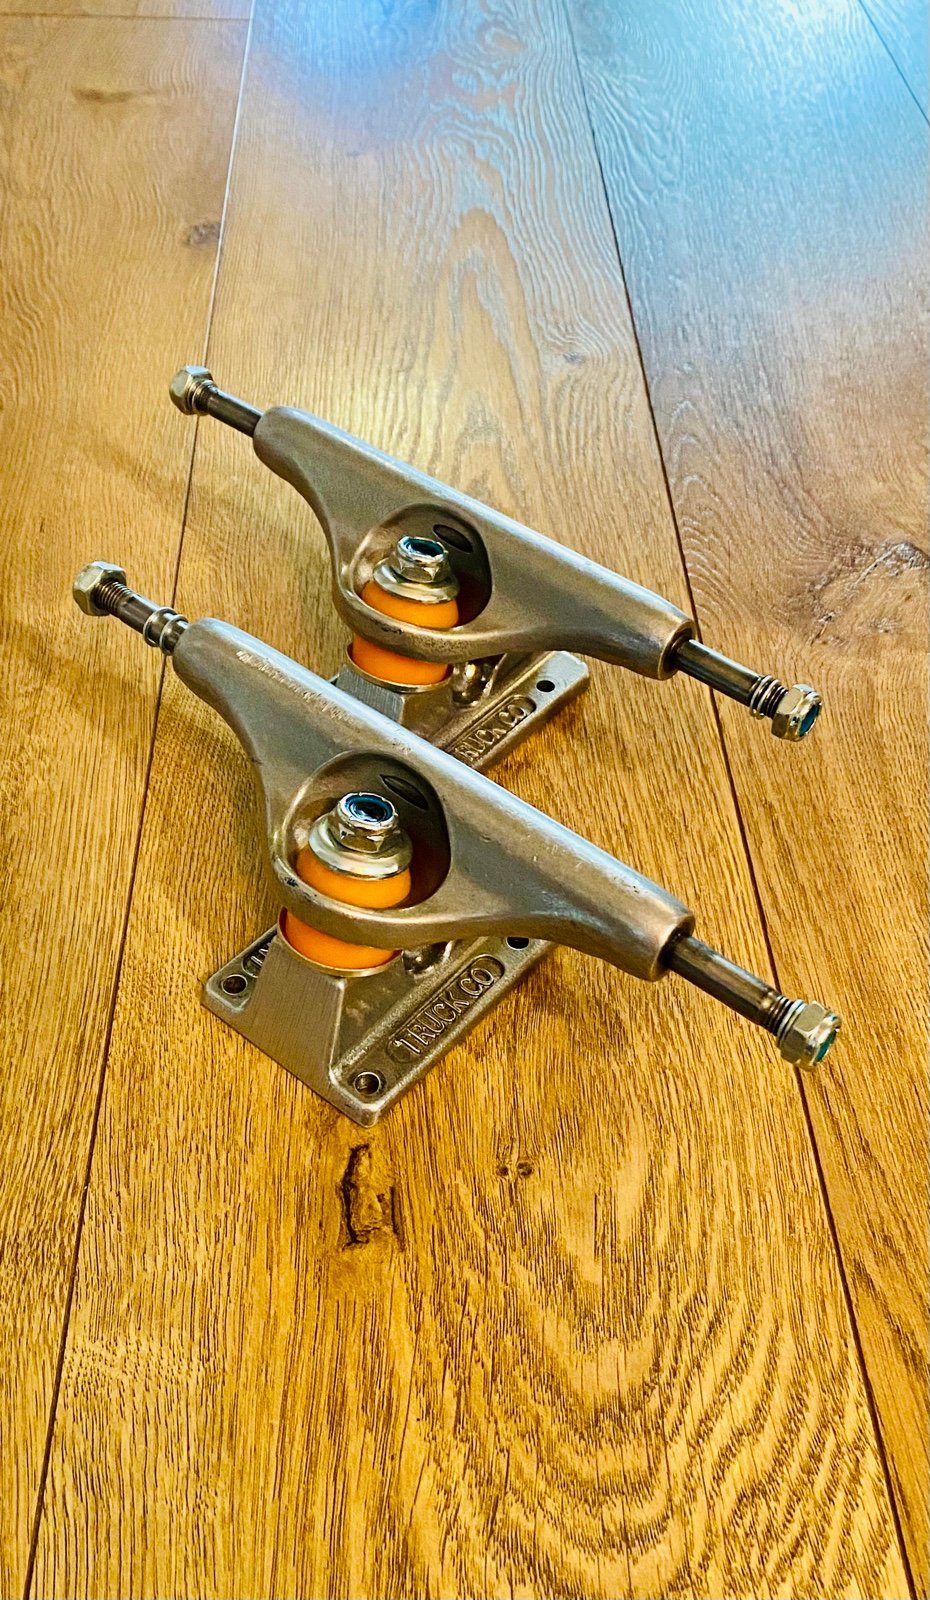 Independent 139mm Stage 11 Skateboard Trucks - 8” Axles (Set Of 2) Lightly Used 7VZoRCYlq